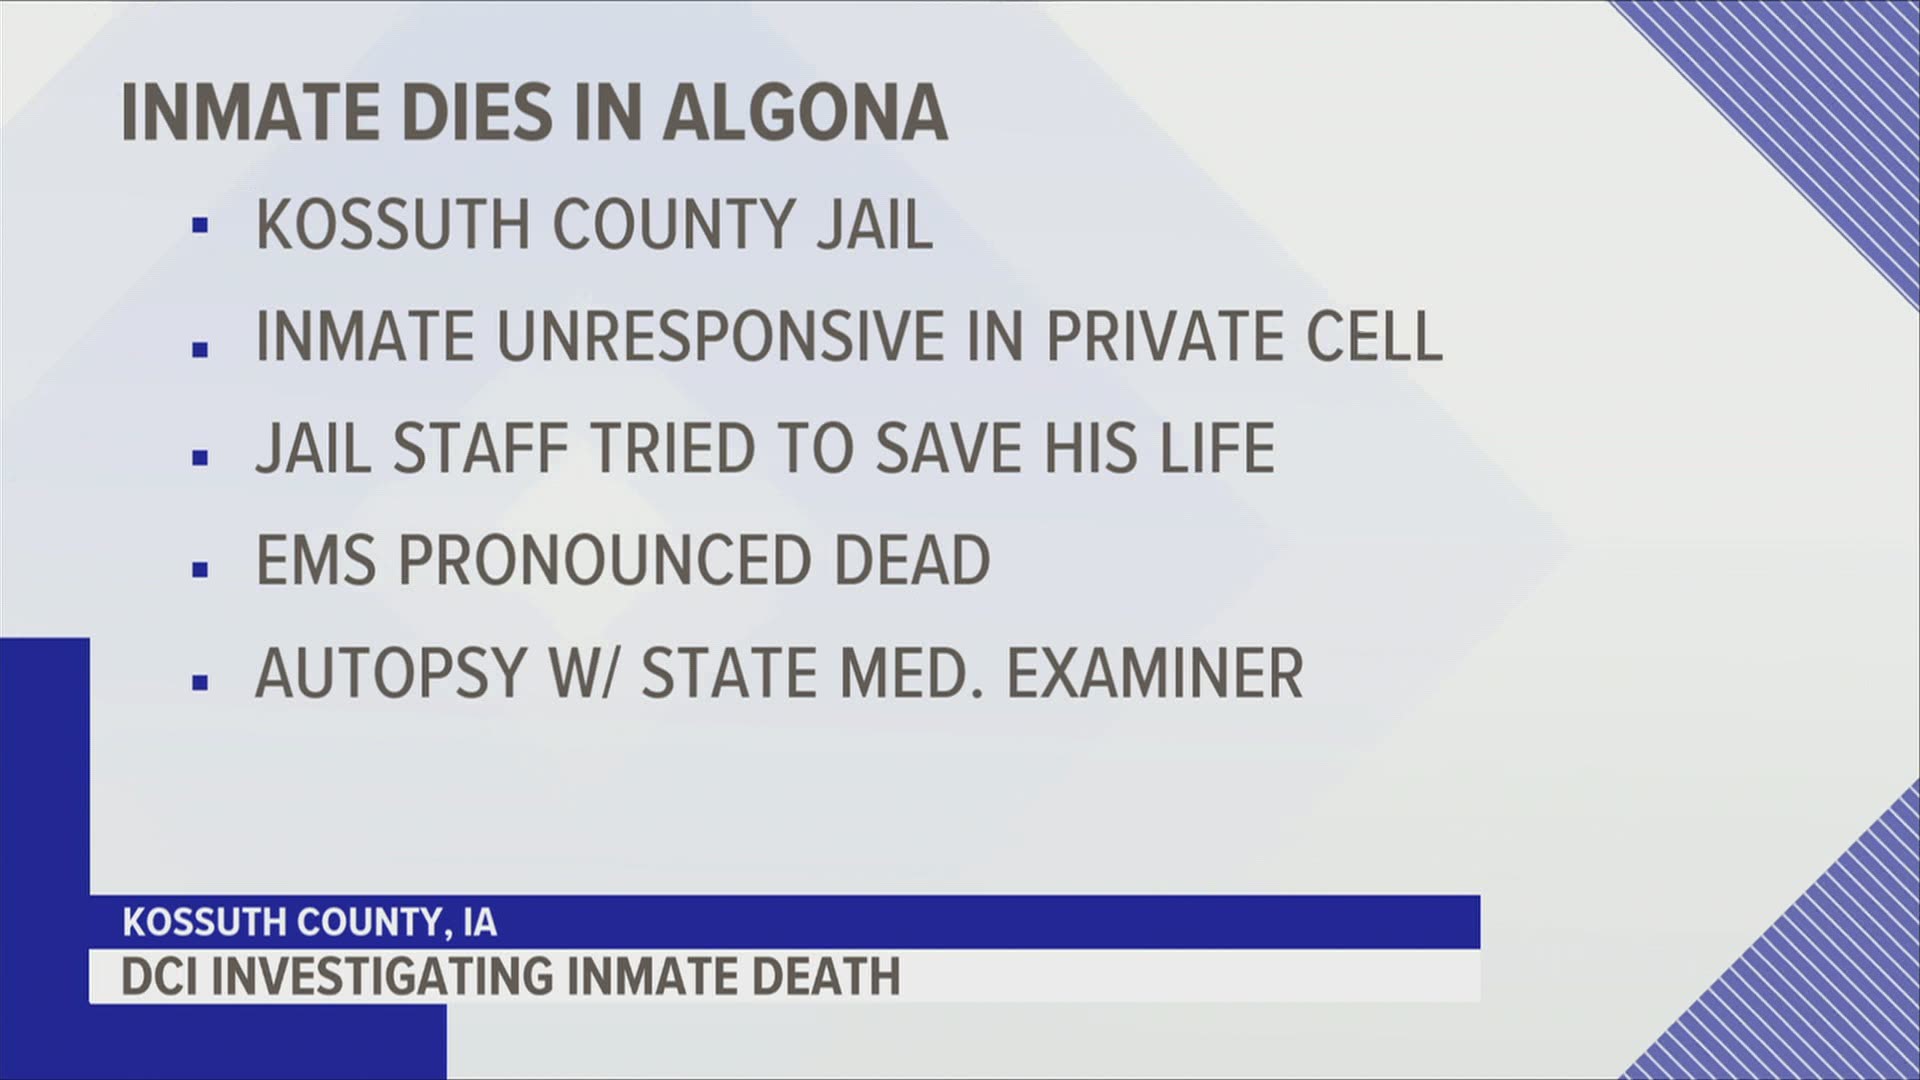 The inmate was found unresponsive in his cell, and was pronounced dead when EMS arrived.